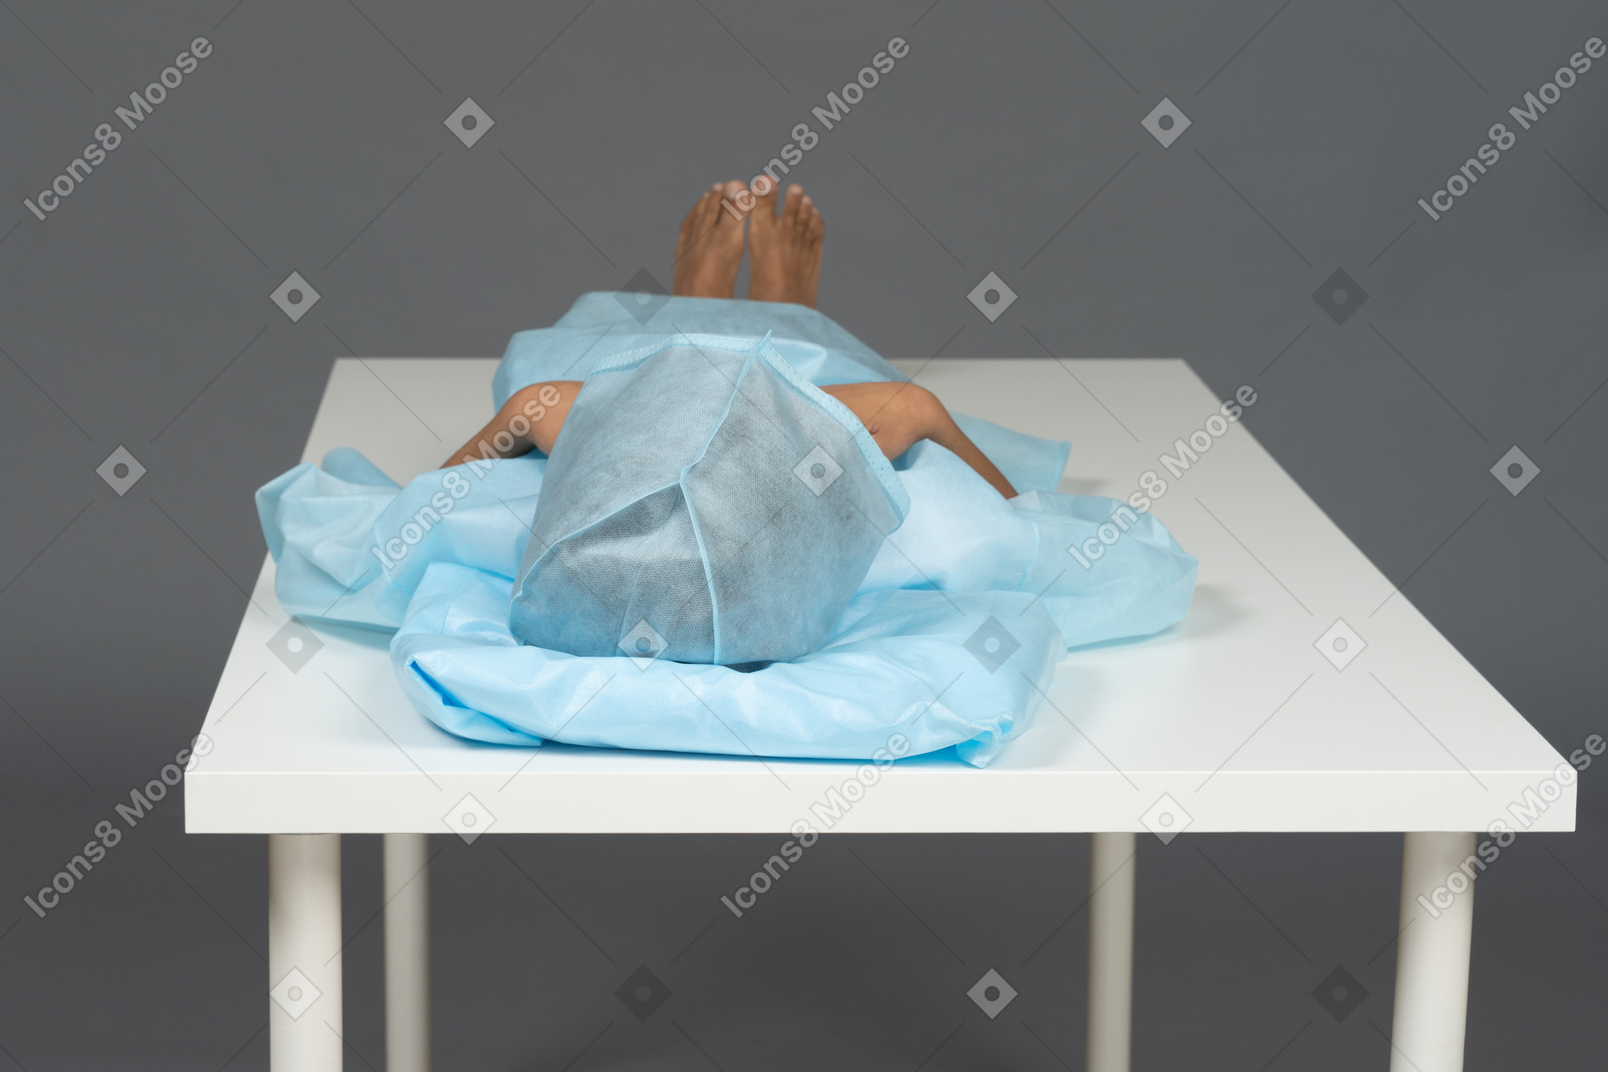 Kid lying down on the table with covered head